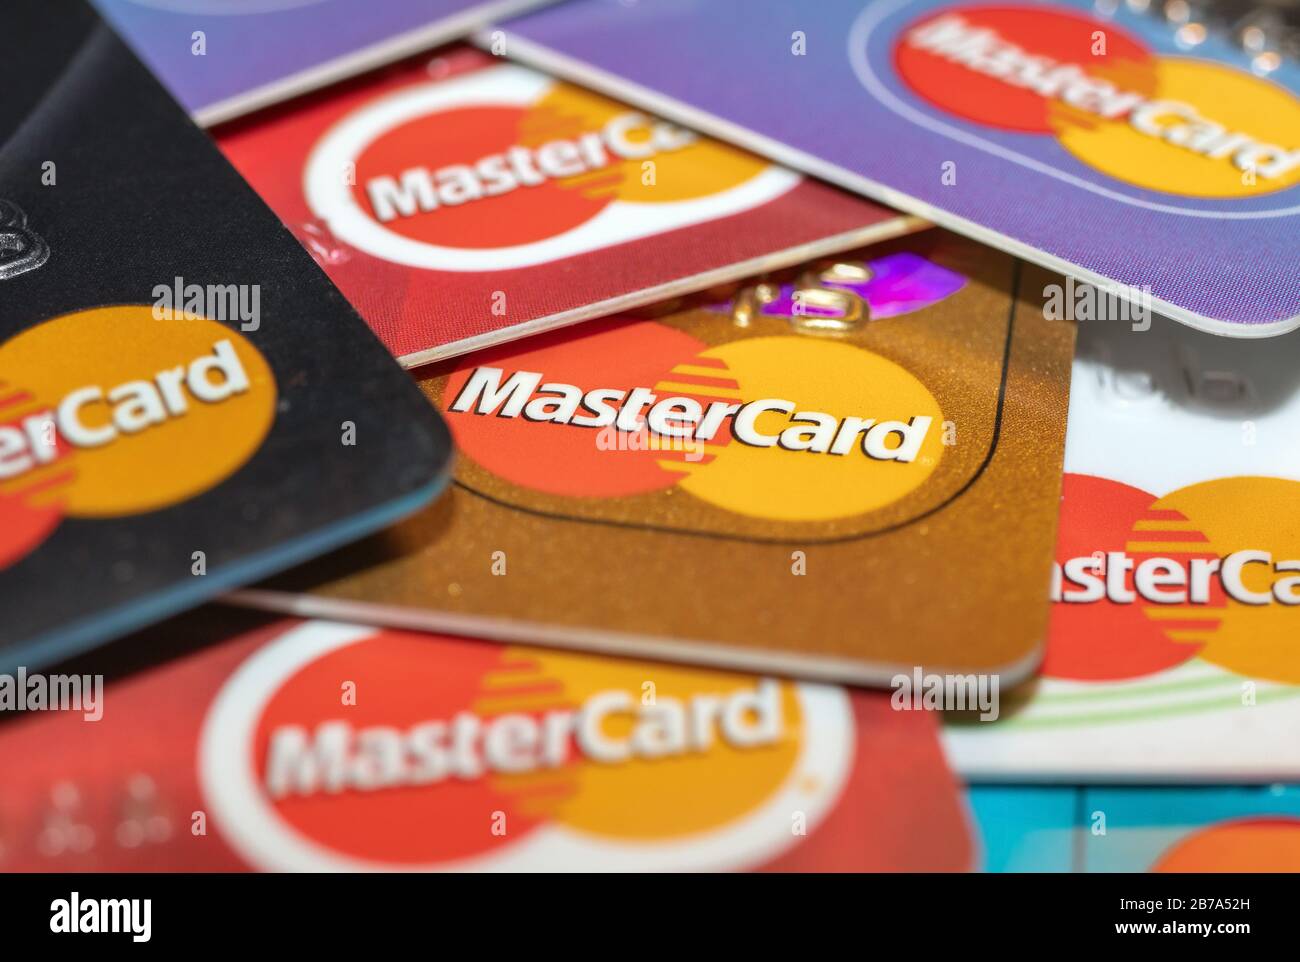 London / UK - March 6th 2020  - Pile of Mastercard bank cards, closeup macro view with a shallow depth of field Stock Photo